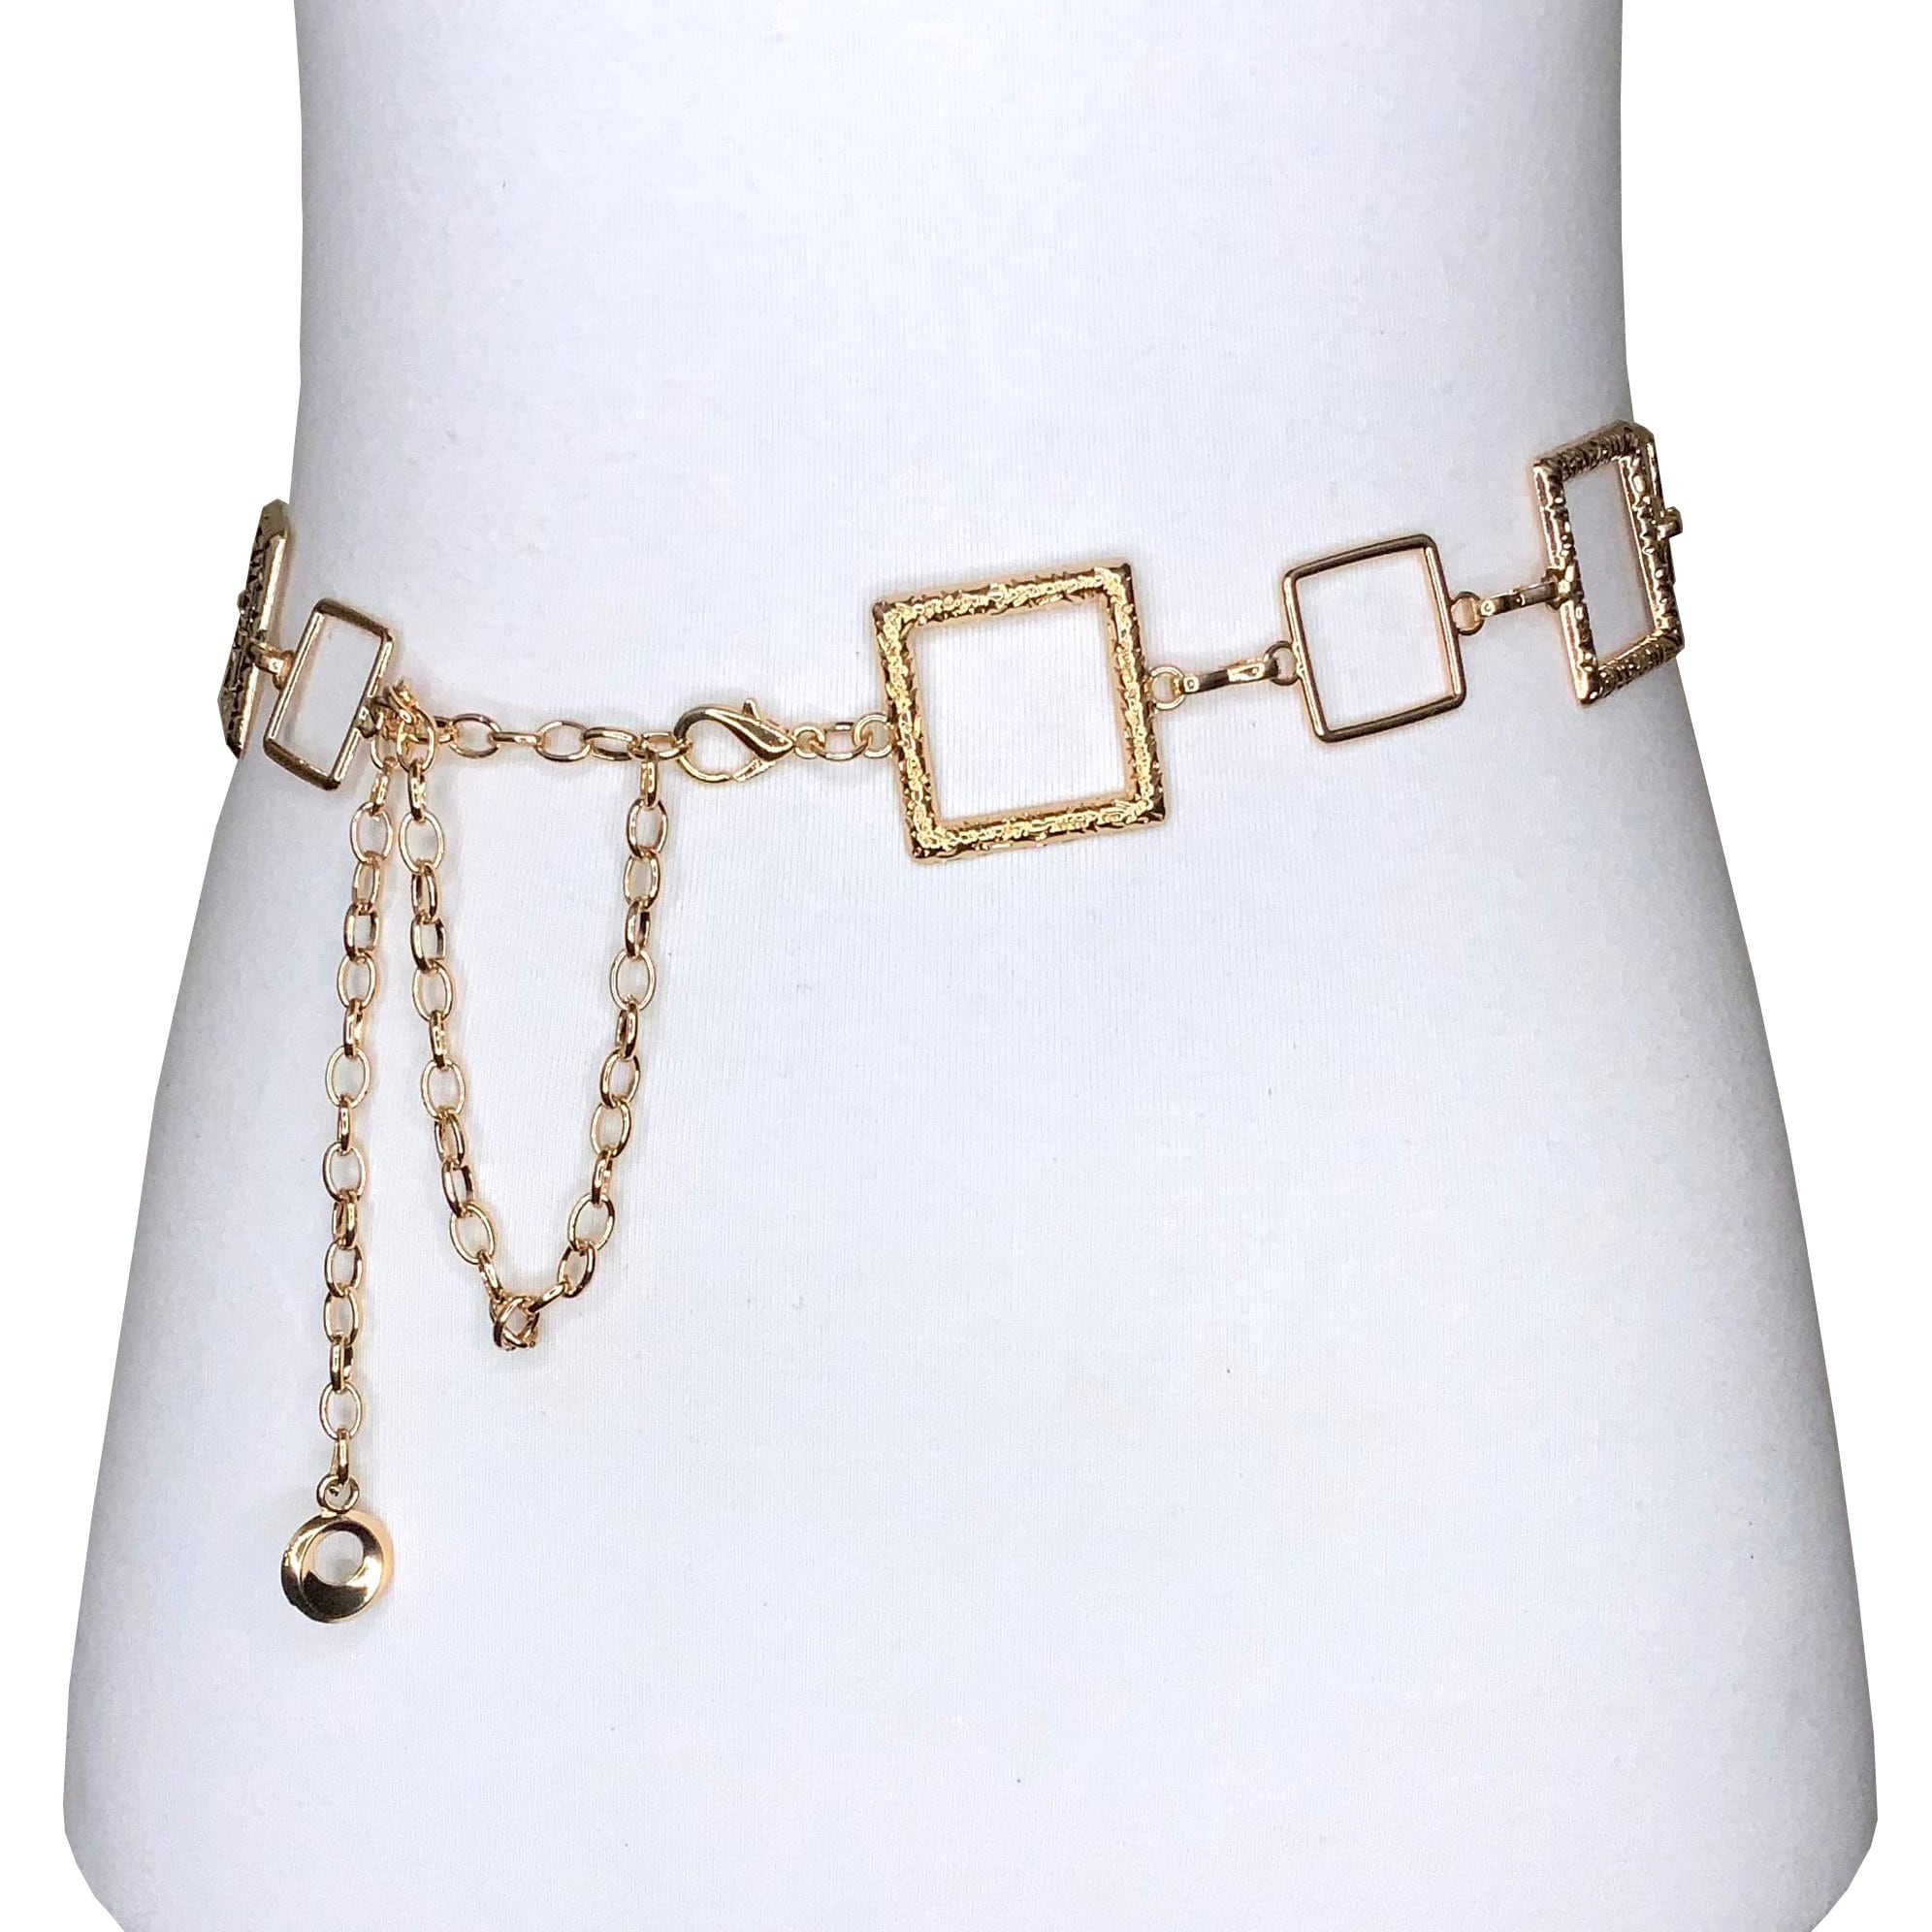 Womenswear Gold Chain Belt, Jewelry Gift for Christmas, New Year